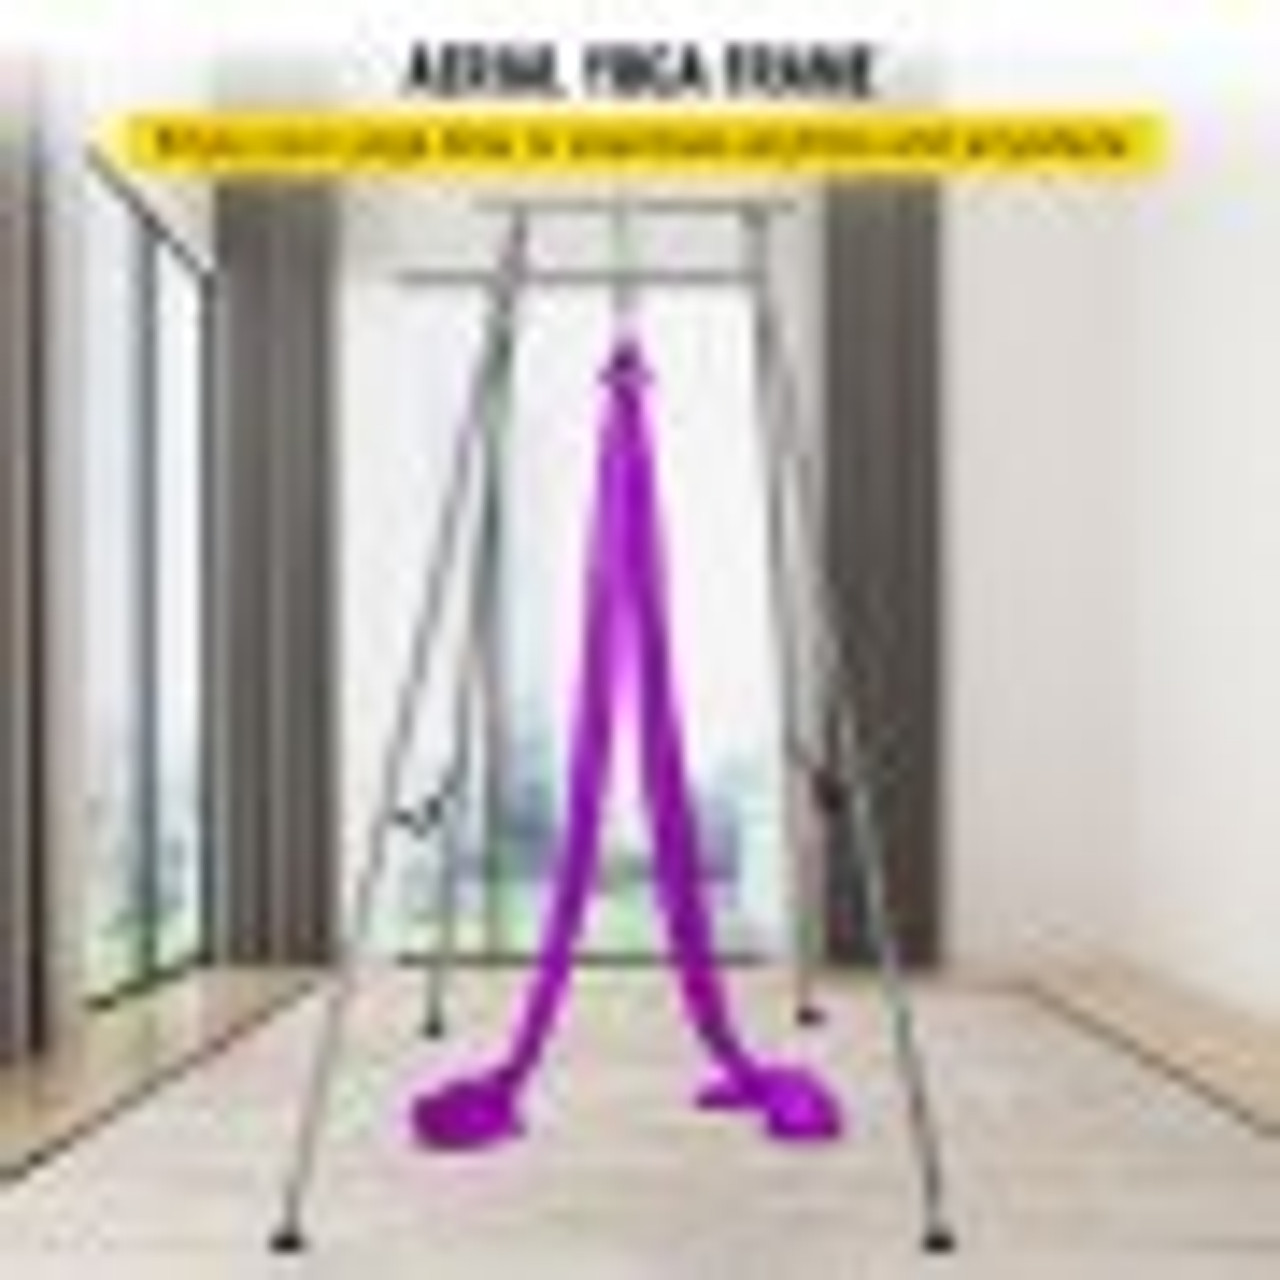 Yoga Sling Inversion, 9.6 FT Height Inversion Yoga Swing Stand, Max Capacity 551 LBS Aerial Yoga Frame with 39.4 FT Yoga Swing Inversion Sling Body Bundle Safety Belts (Purple)